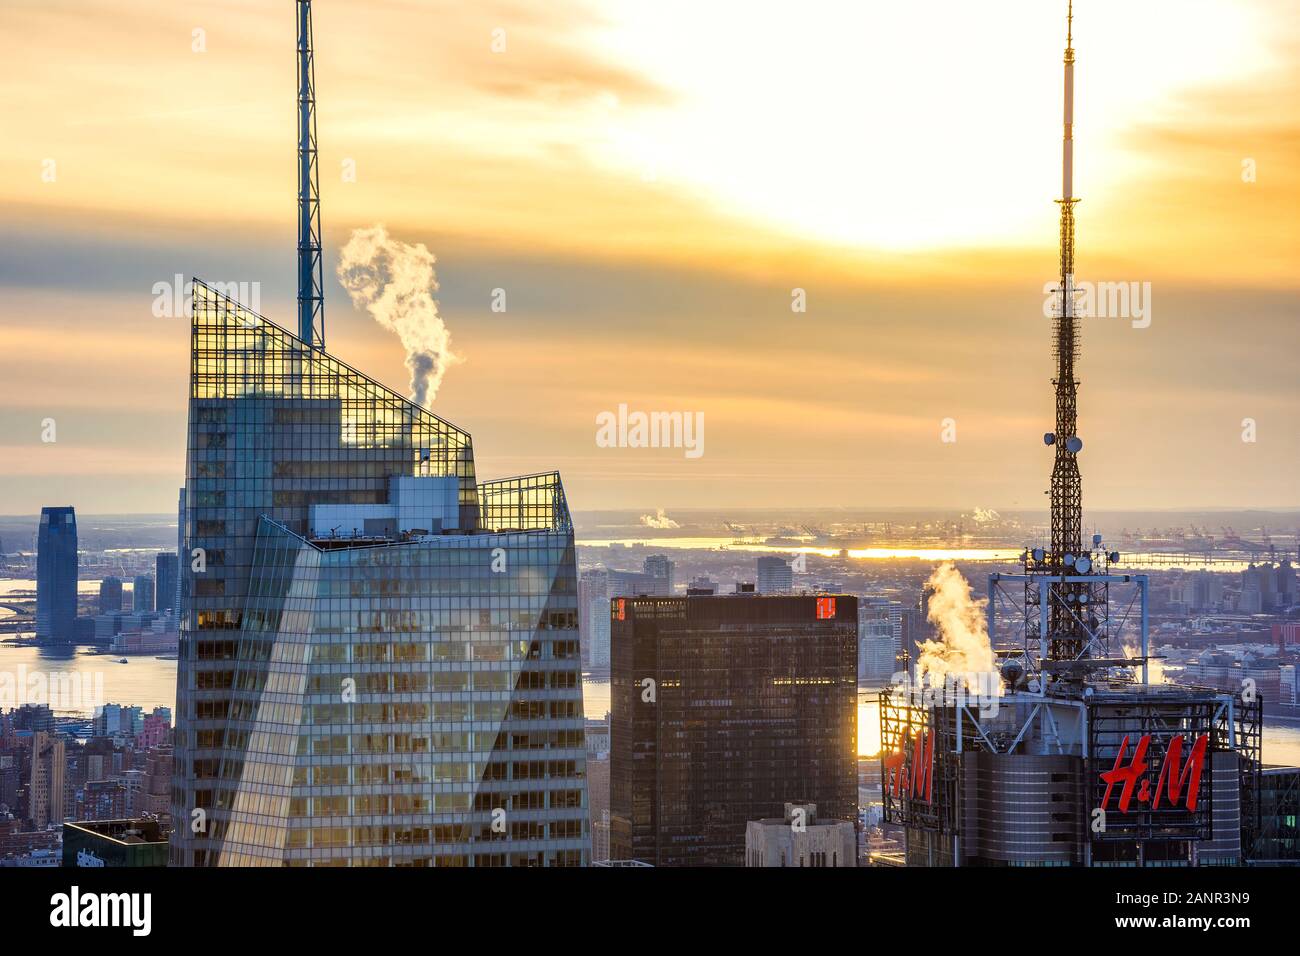 Manhattan, New York, NY, USA - November 30, 2019. New york City architecture with Manhattan skyline at dusk from Top of the Rock, Rockefeller Center . Stock Photo